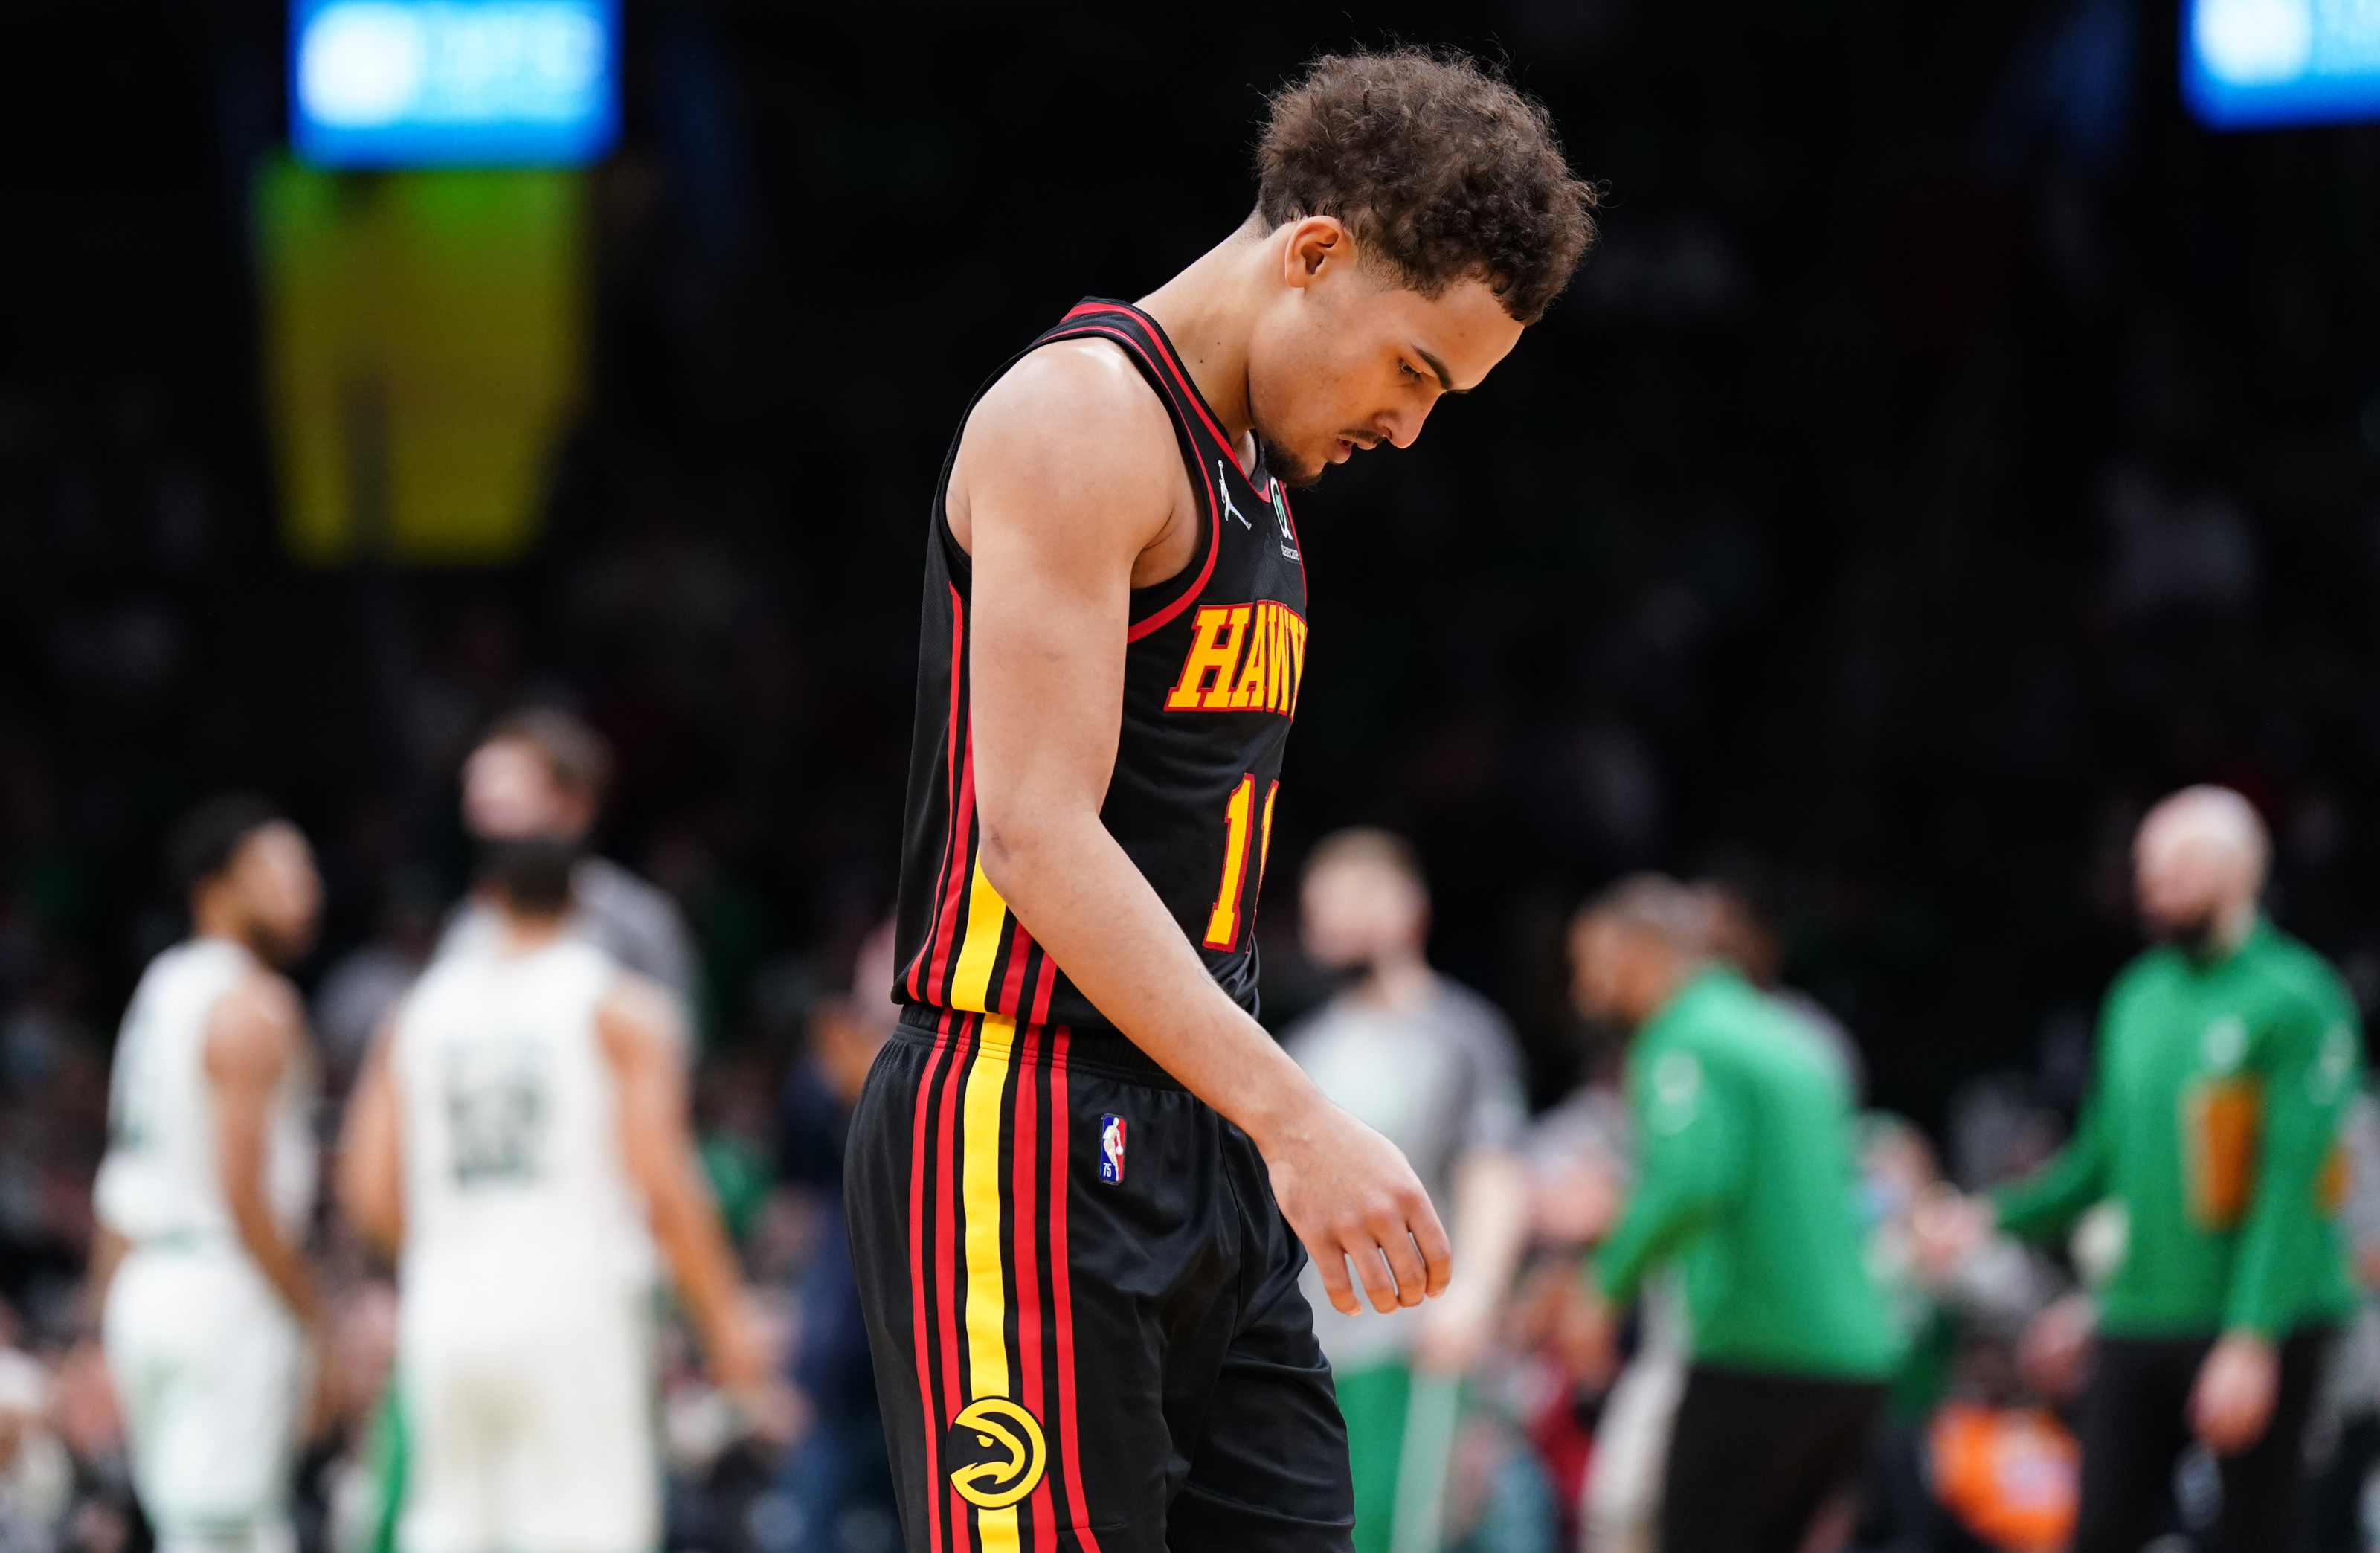 Atlanta Hawks on X: A uniform years in the making. We are proud